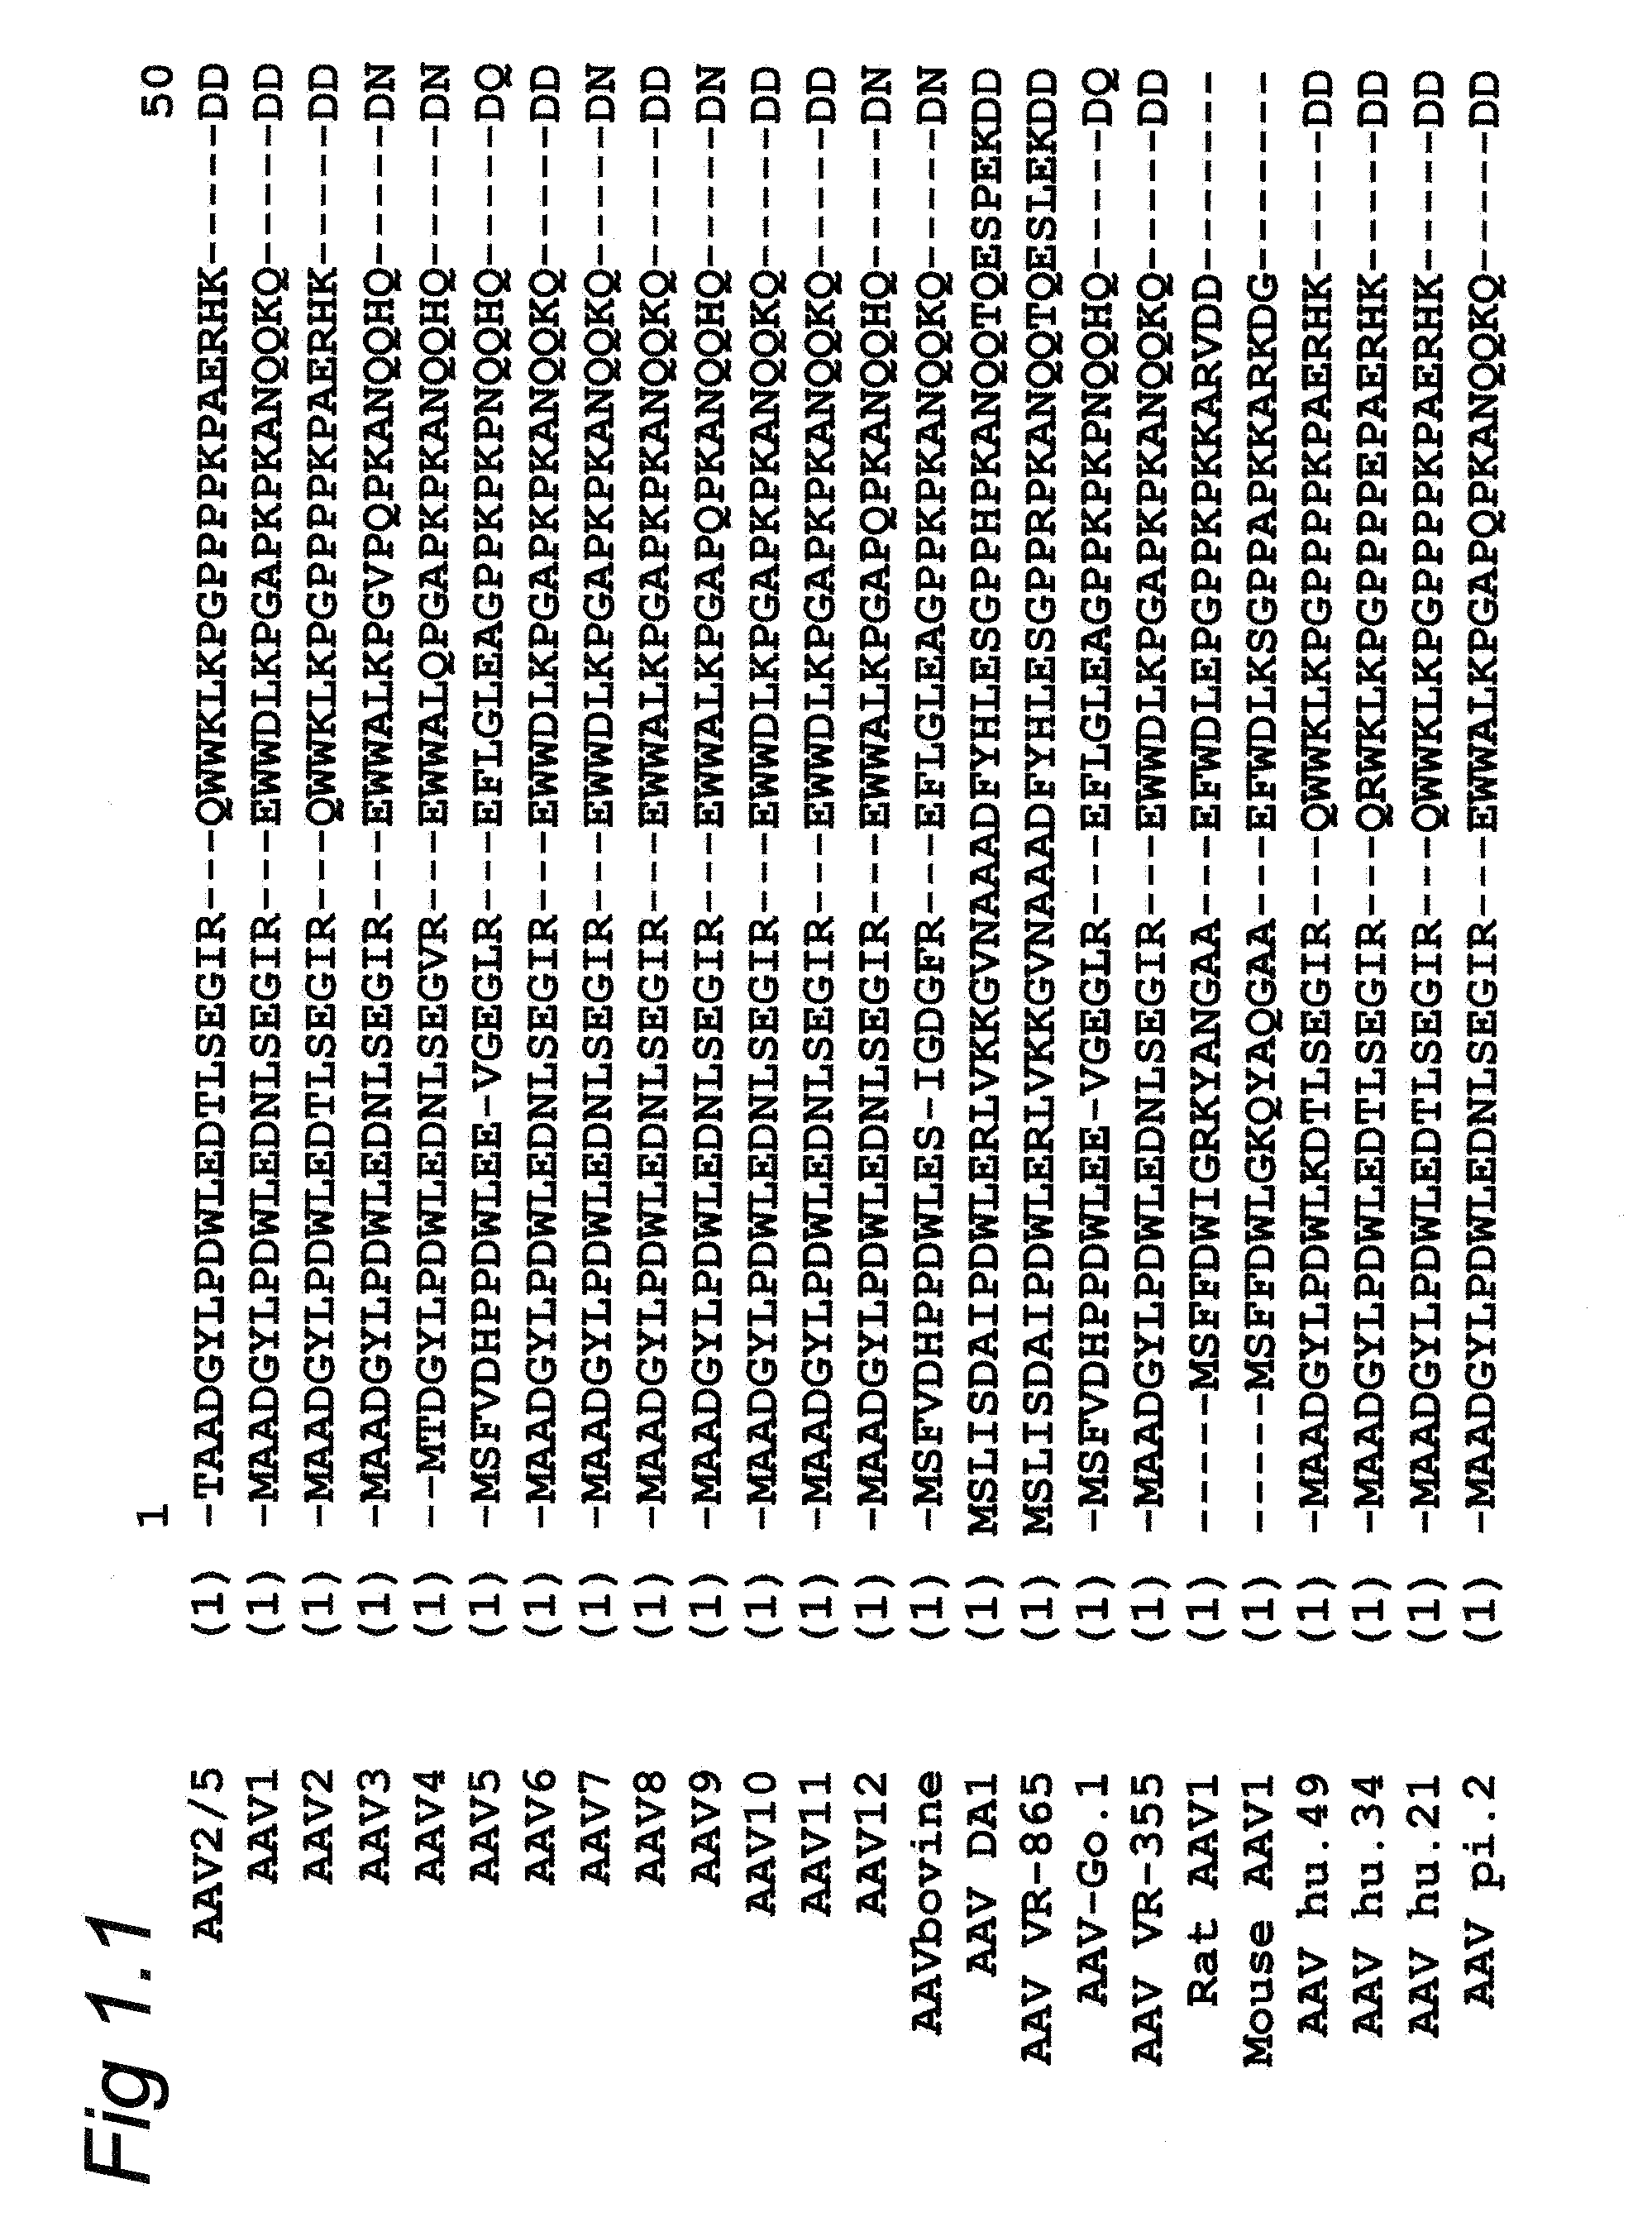 Parvoviral capsid with incorporated gly-ala repeat region